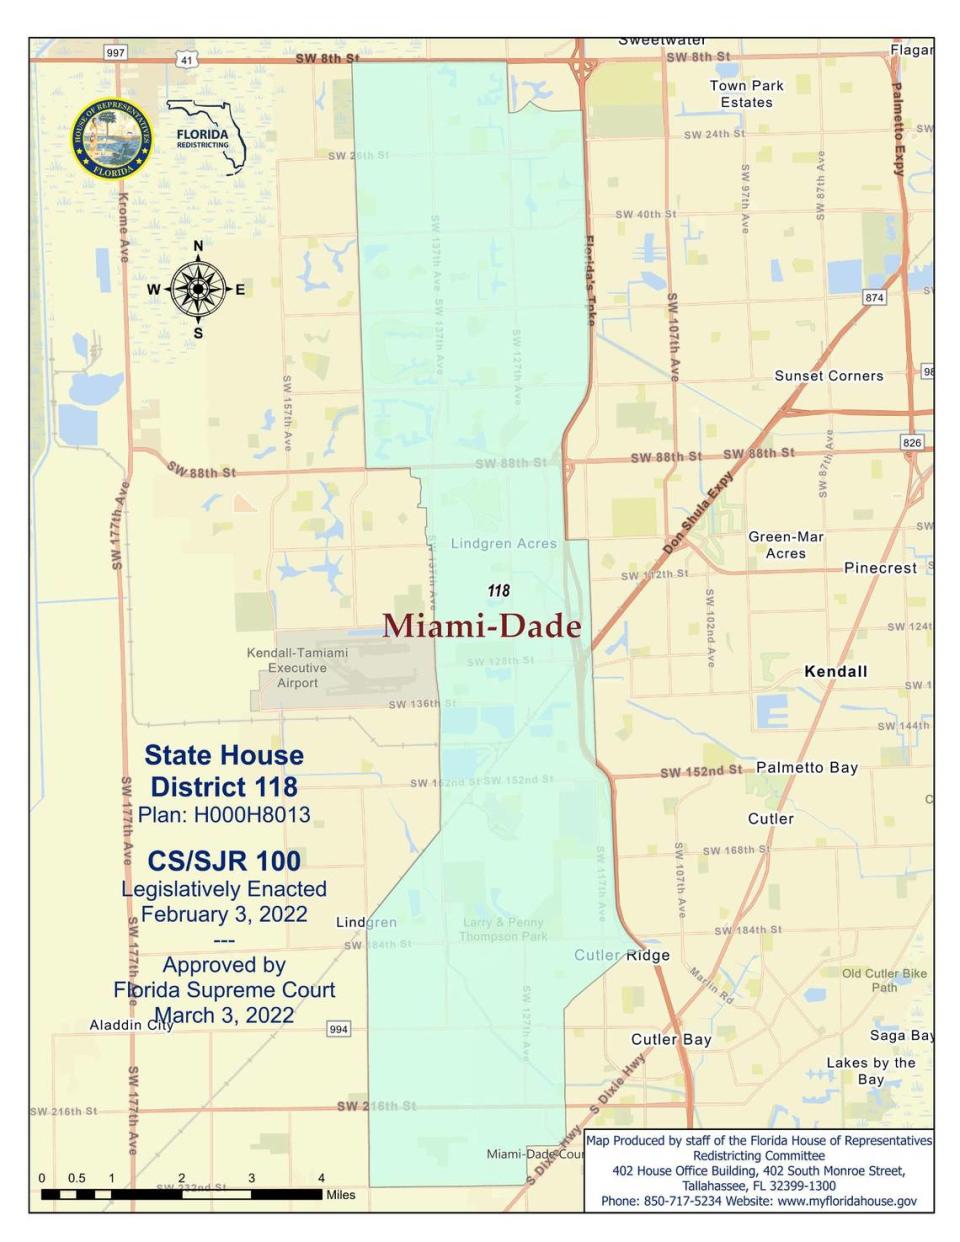 This is the area of Miami-Dade County that is included in House District 118.